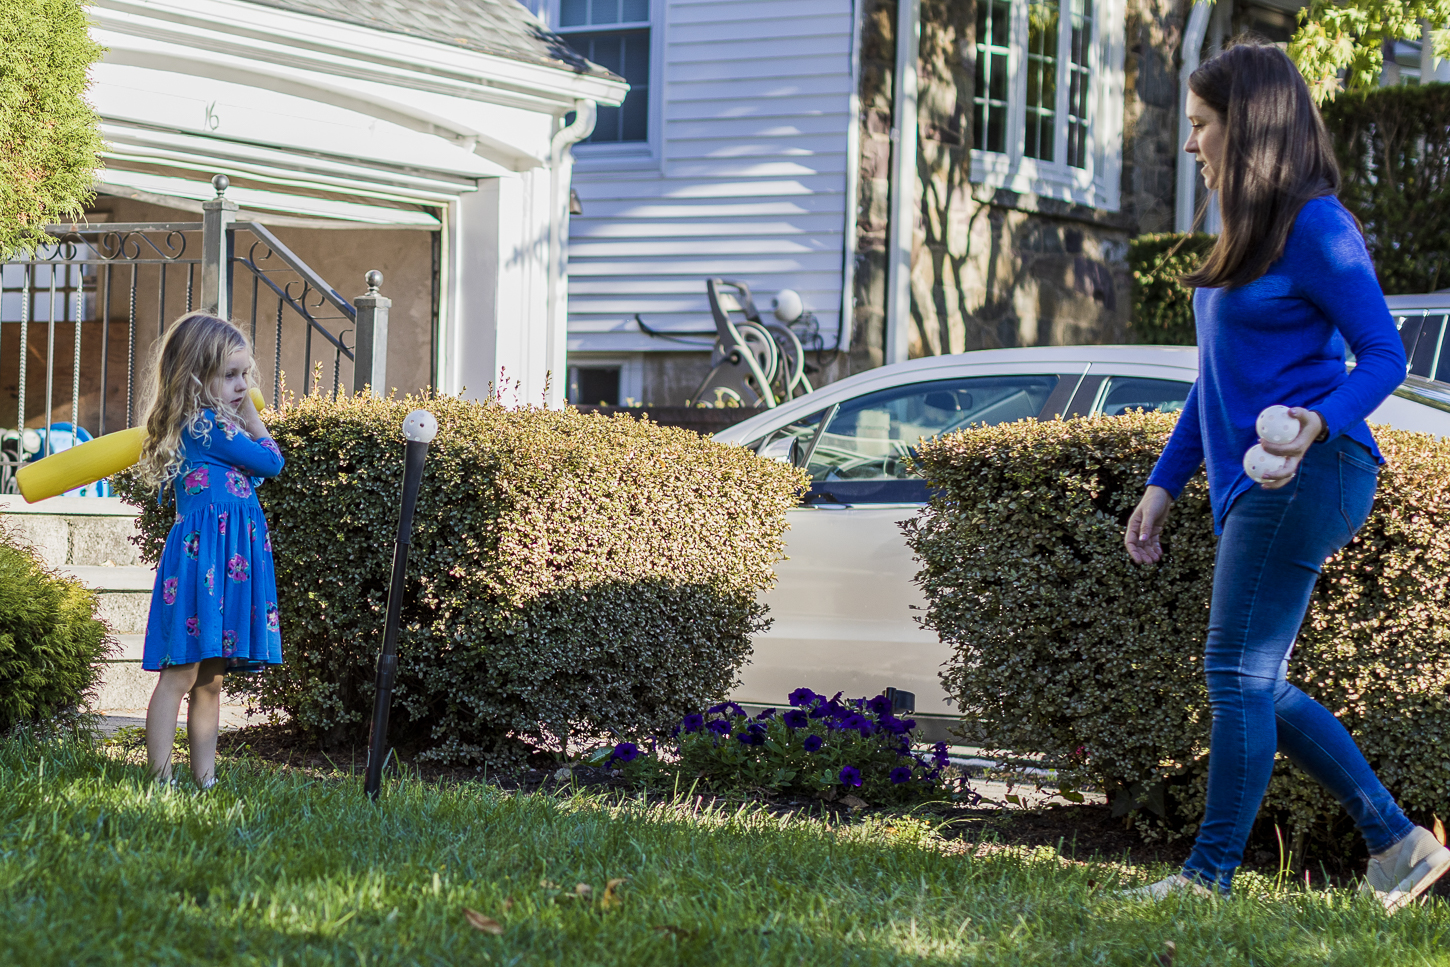 Jessica York, to the right, walks toward her daughter as her daughter hits a softball with a yellow bat. Her daughter is wearing a floral blue dress, and Jessica is wearing a blue shirt and blue jeans. They are standing on the front lawn outside of their home in New Jersey.